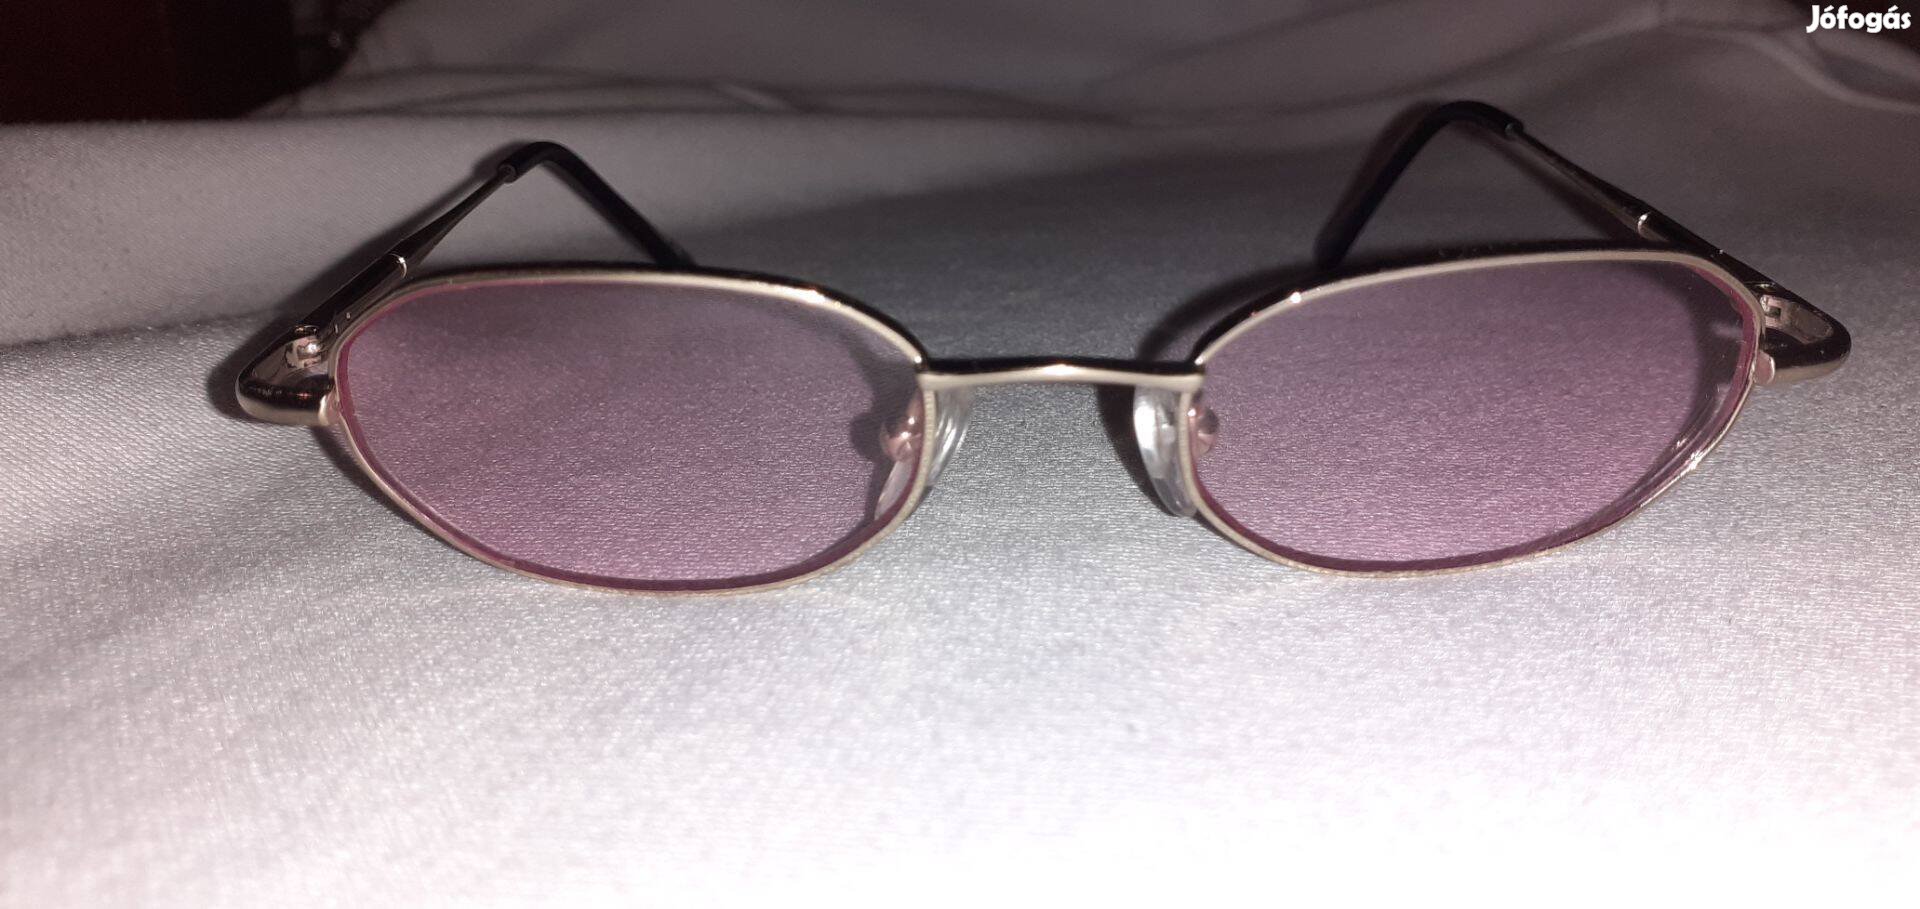 Sunglasses with colored lenses